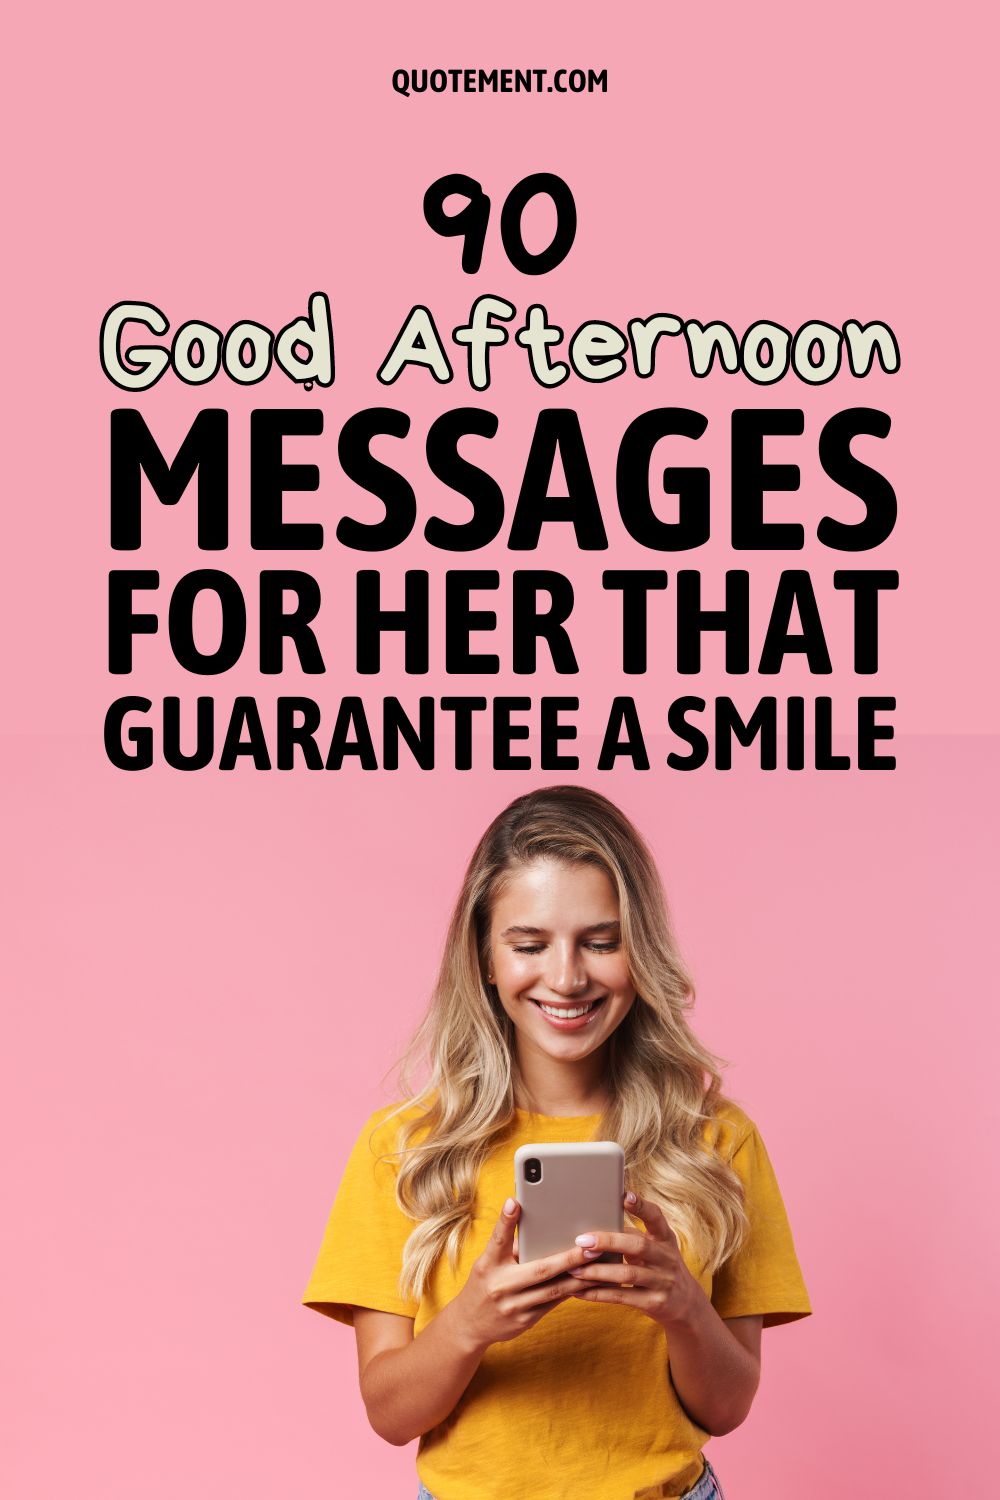 90 Good Afternoon Messages For Her That Guarantee A Smile